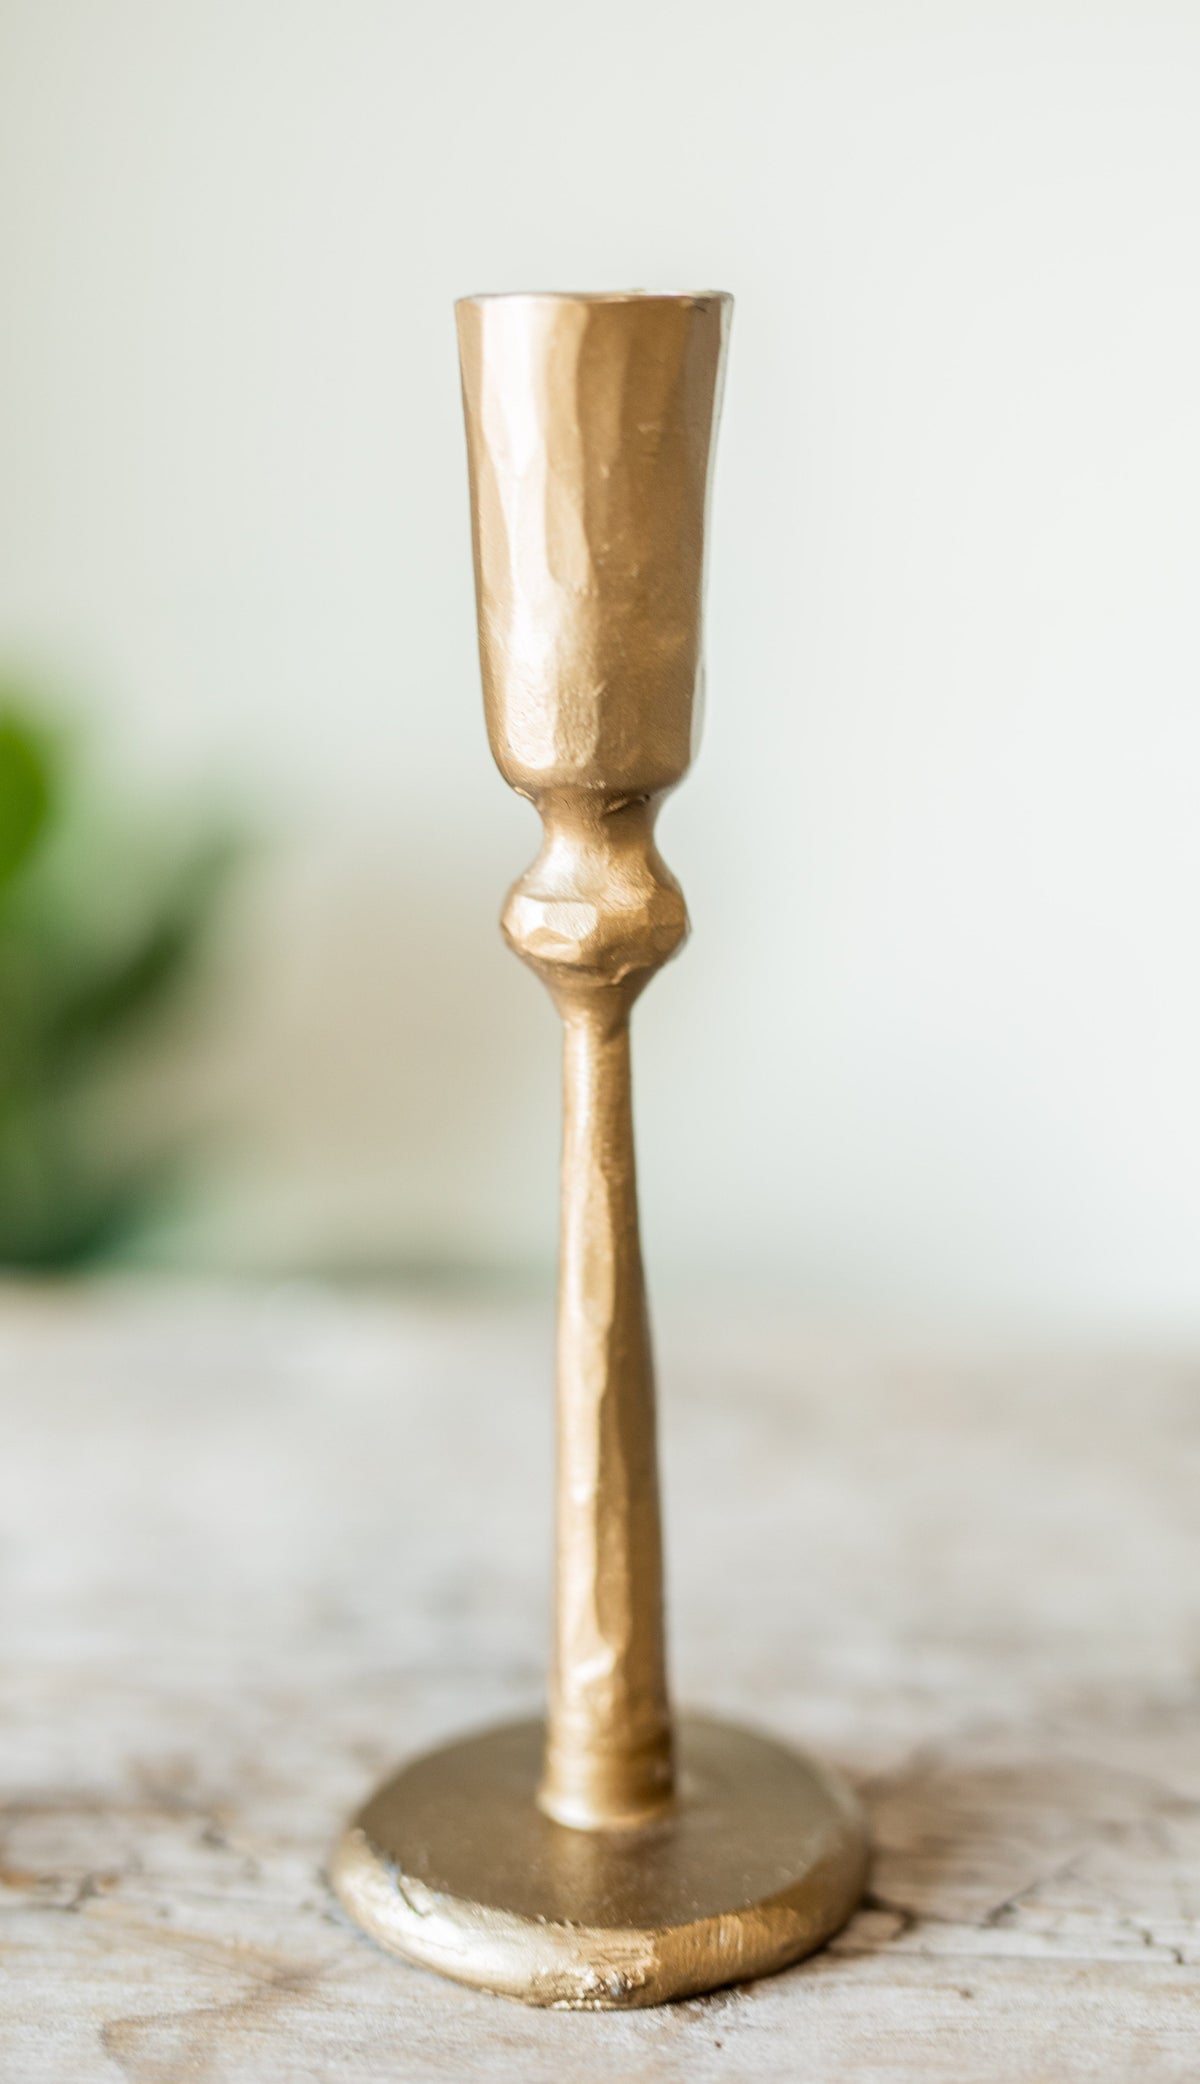 Hand-Forged Metal Taper Candle Holder